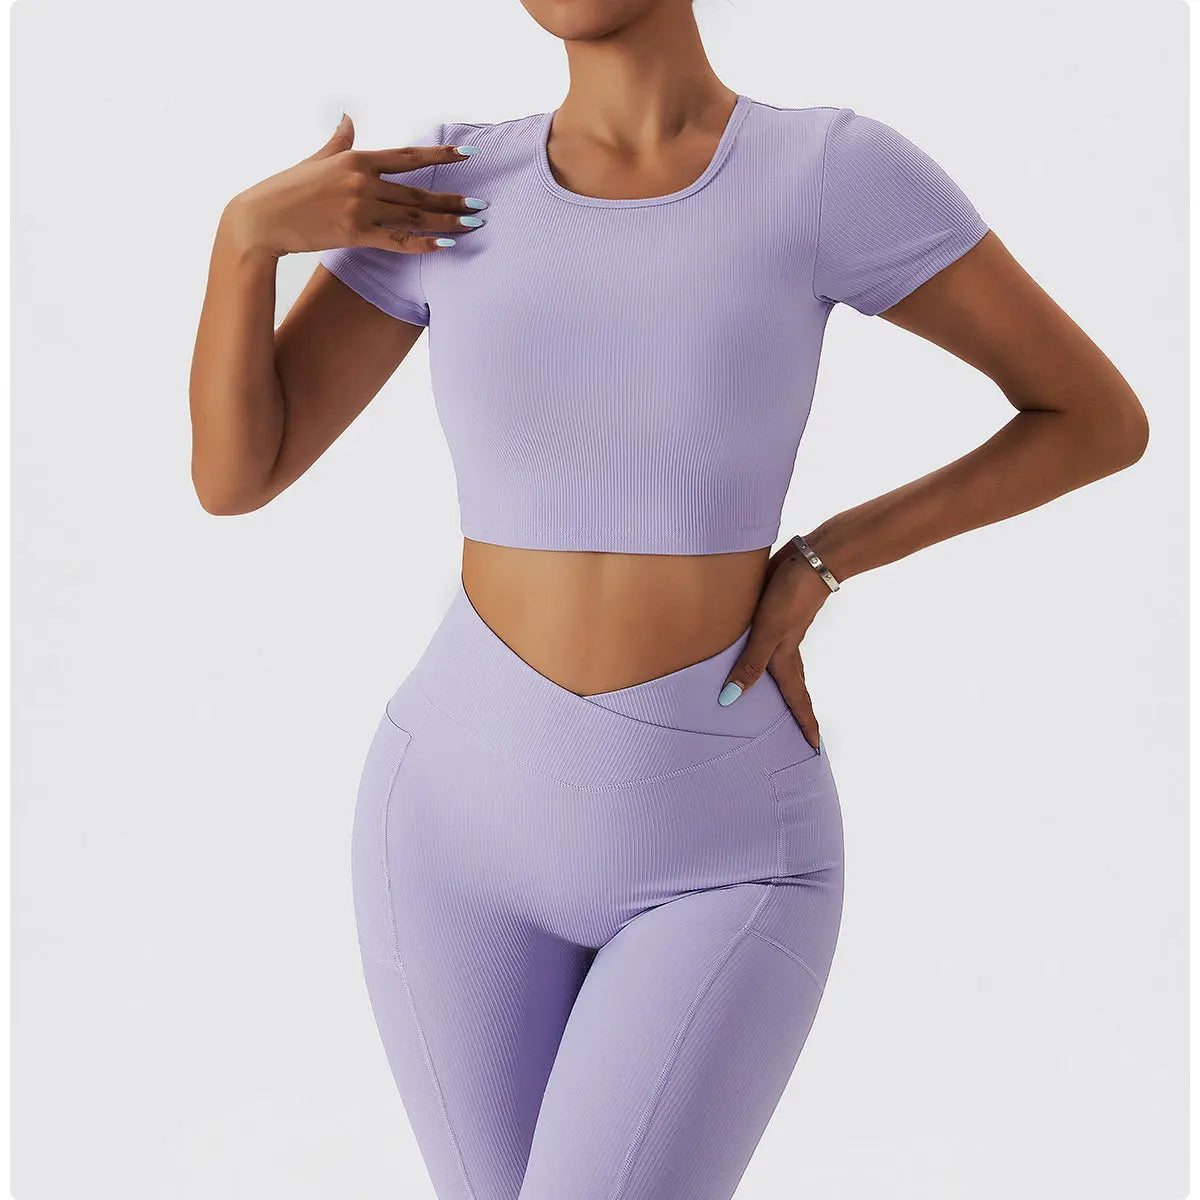 Chic Sports Top and Leggings Set